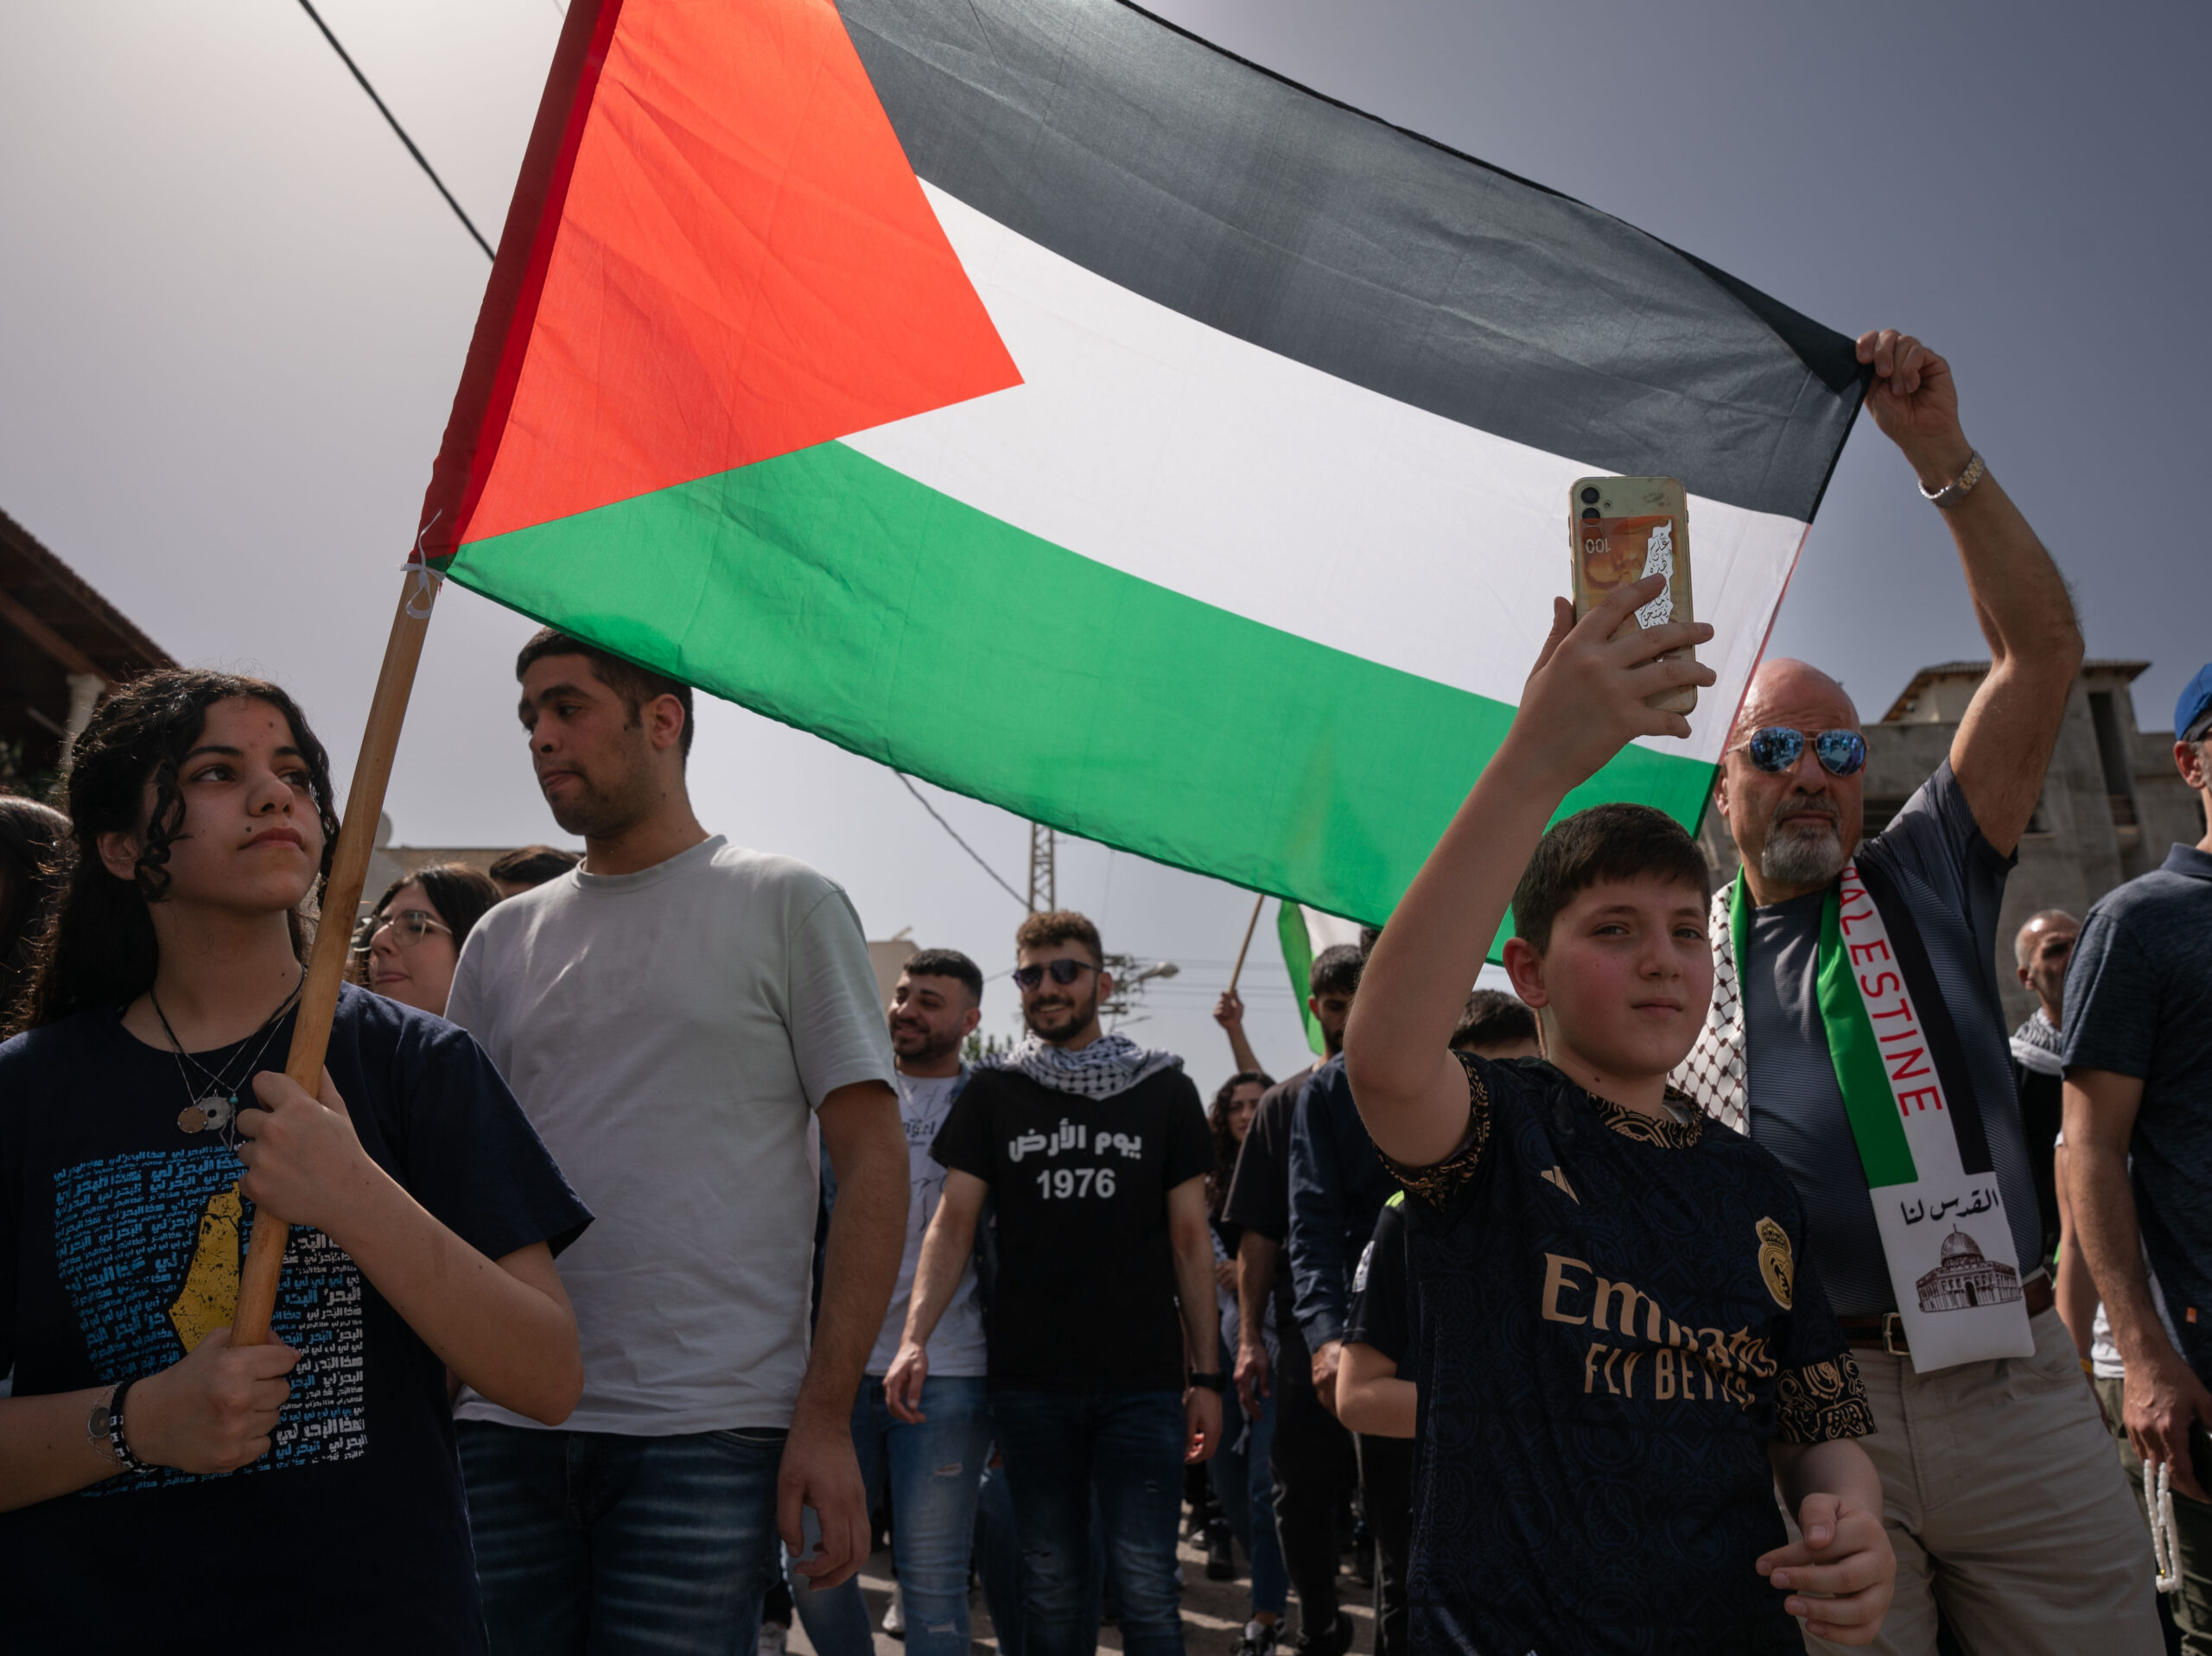 Israel’s Palestinian citizens grow louder in protesting the Gaza war